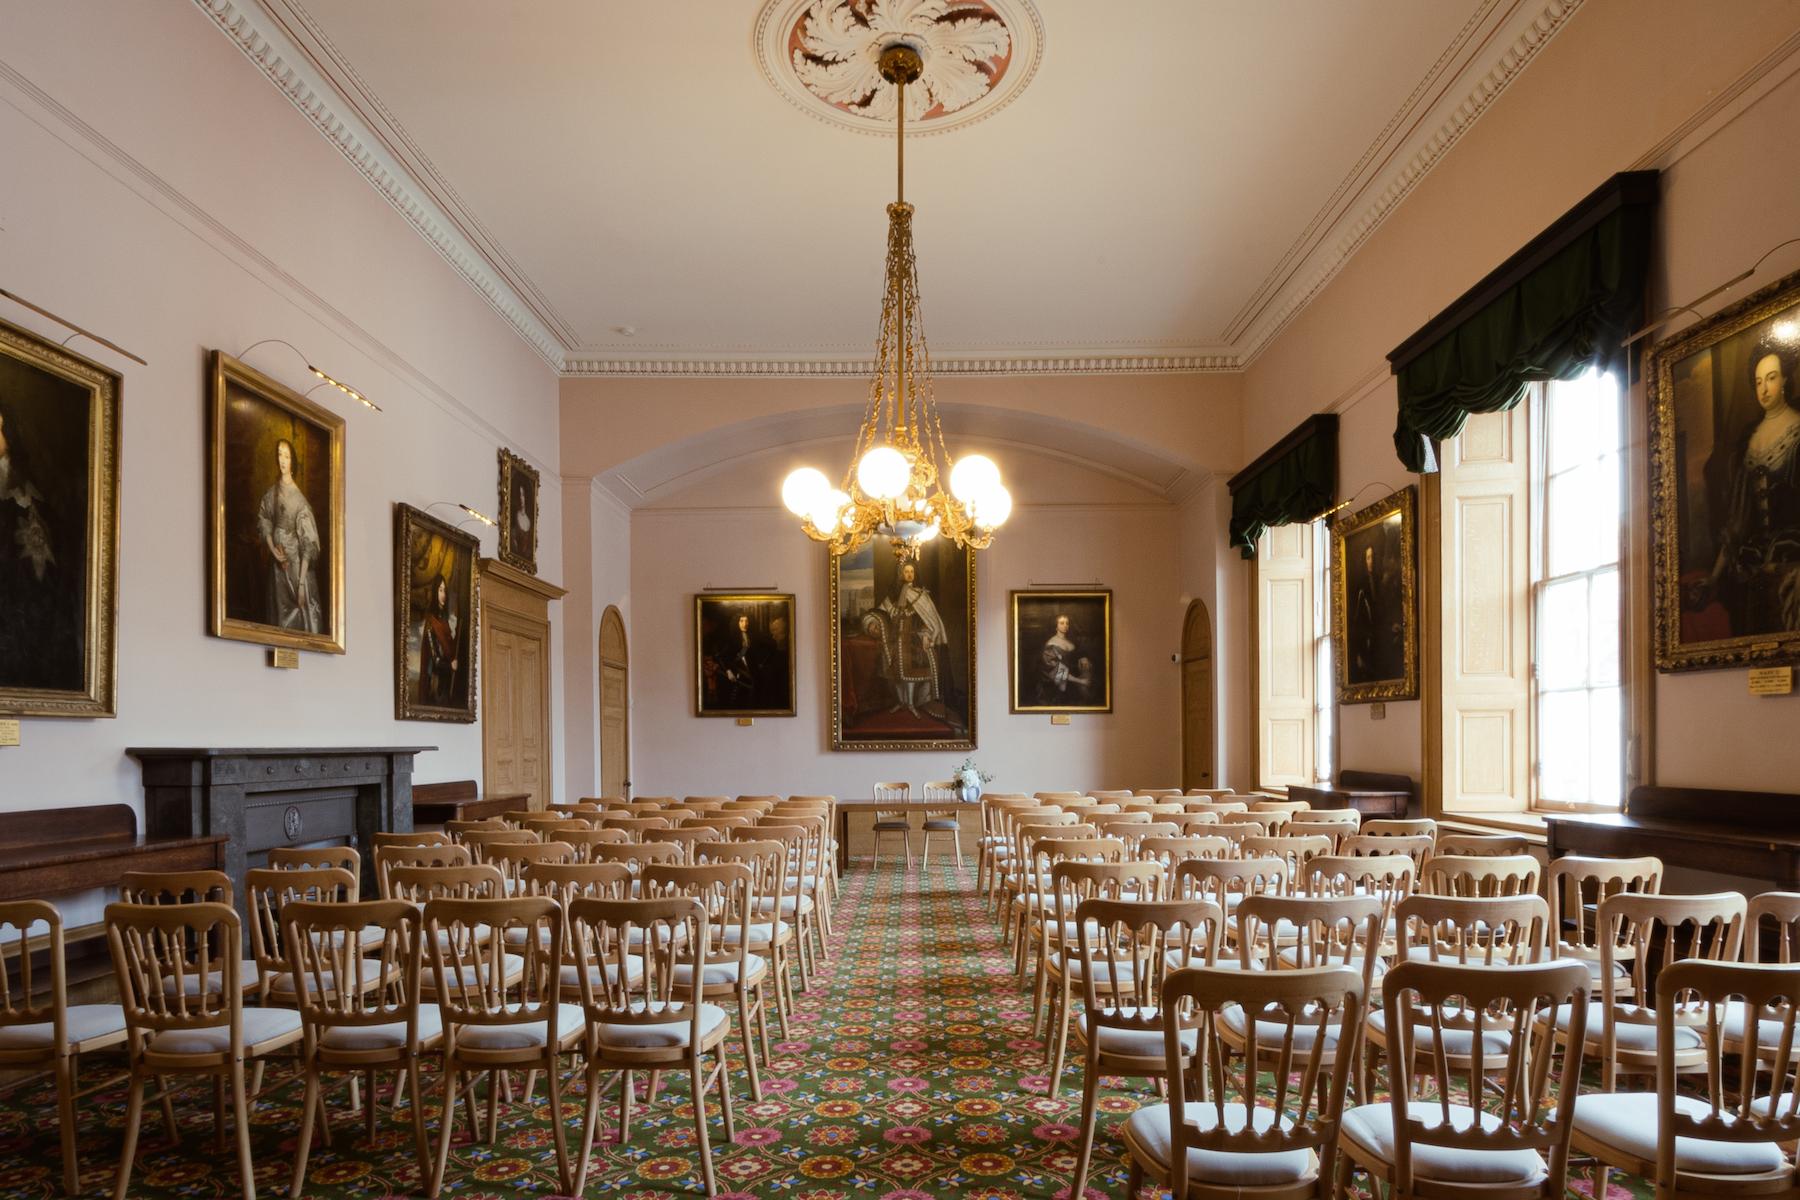 Photograph of Judges dining room